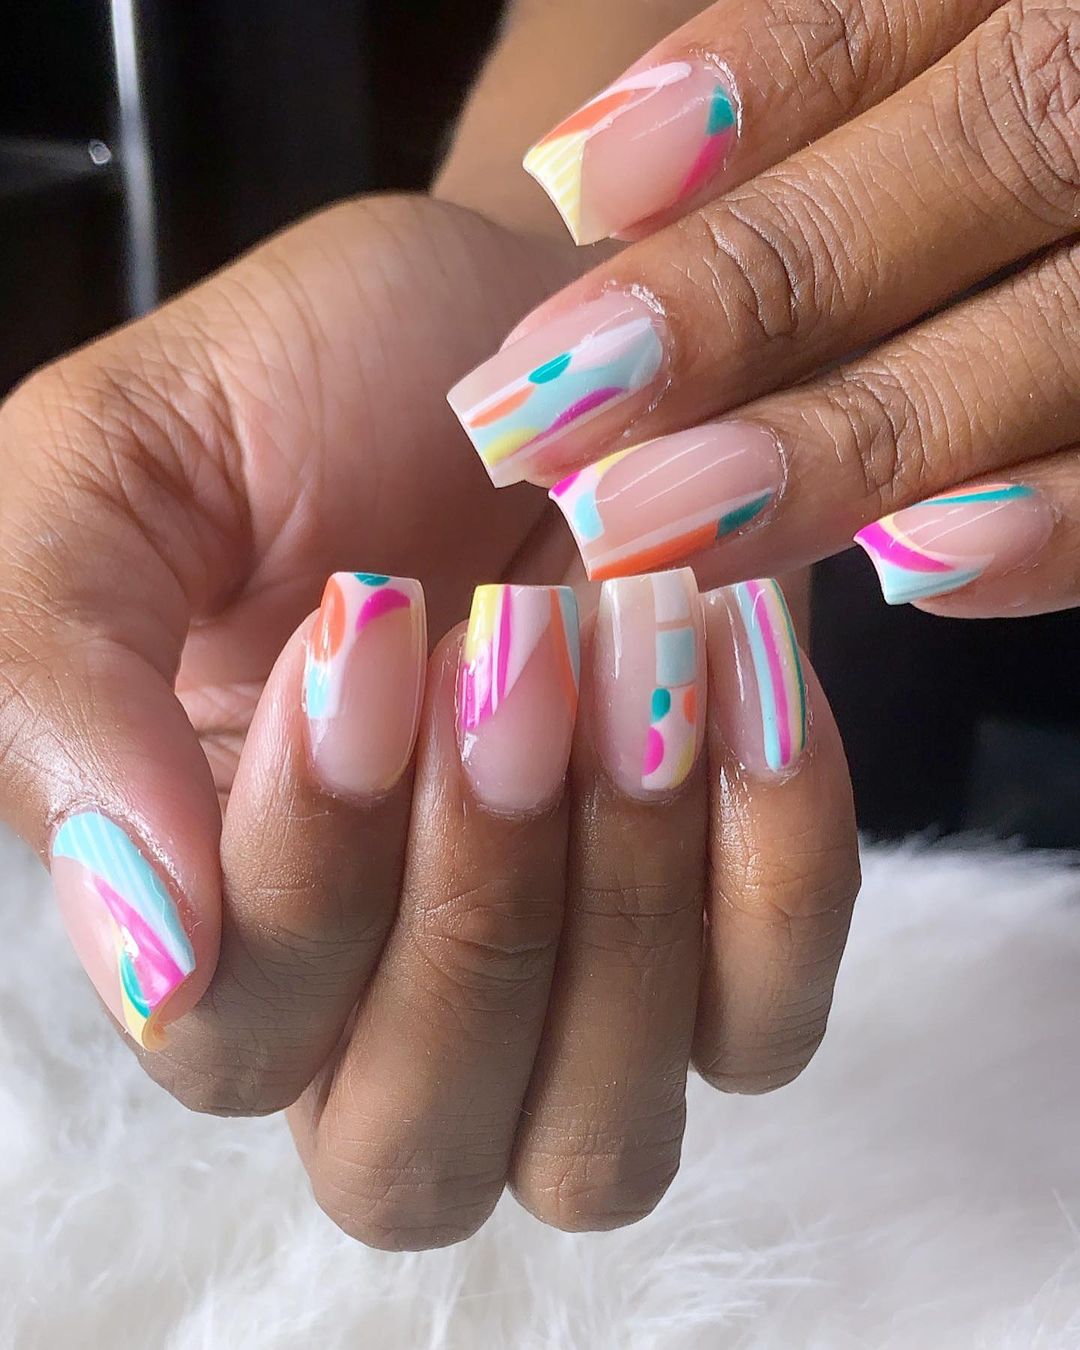 What Nail Designs Are Trending Right Now Daily Nail Art And Design